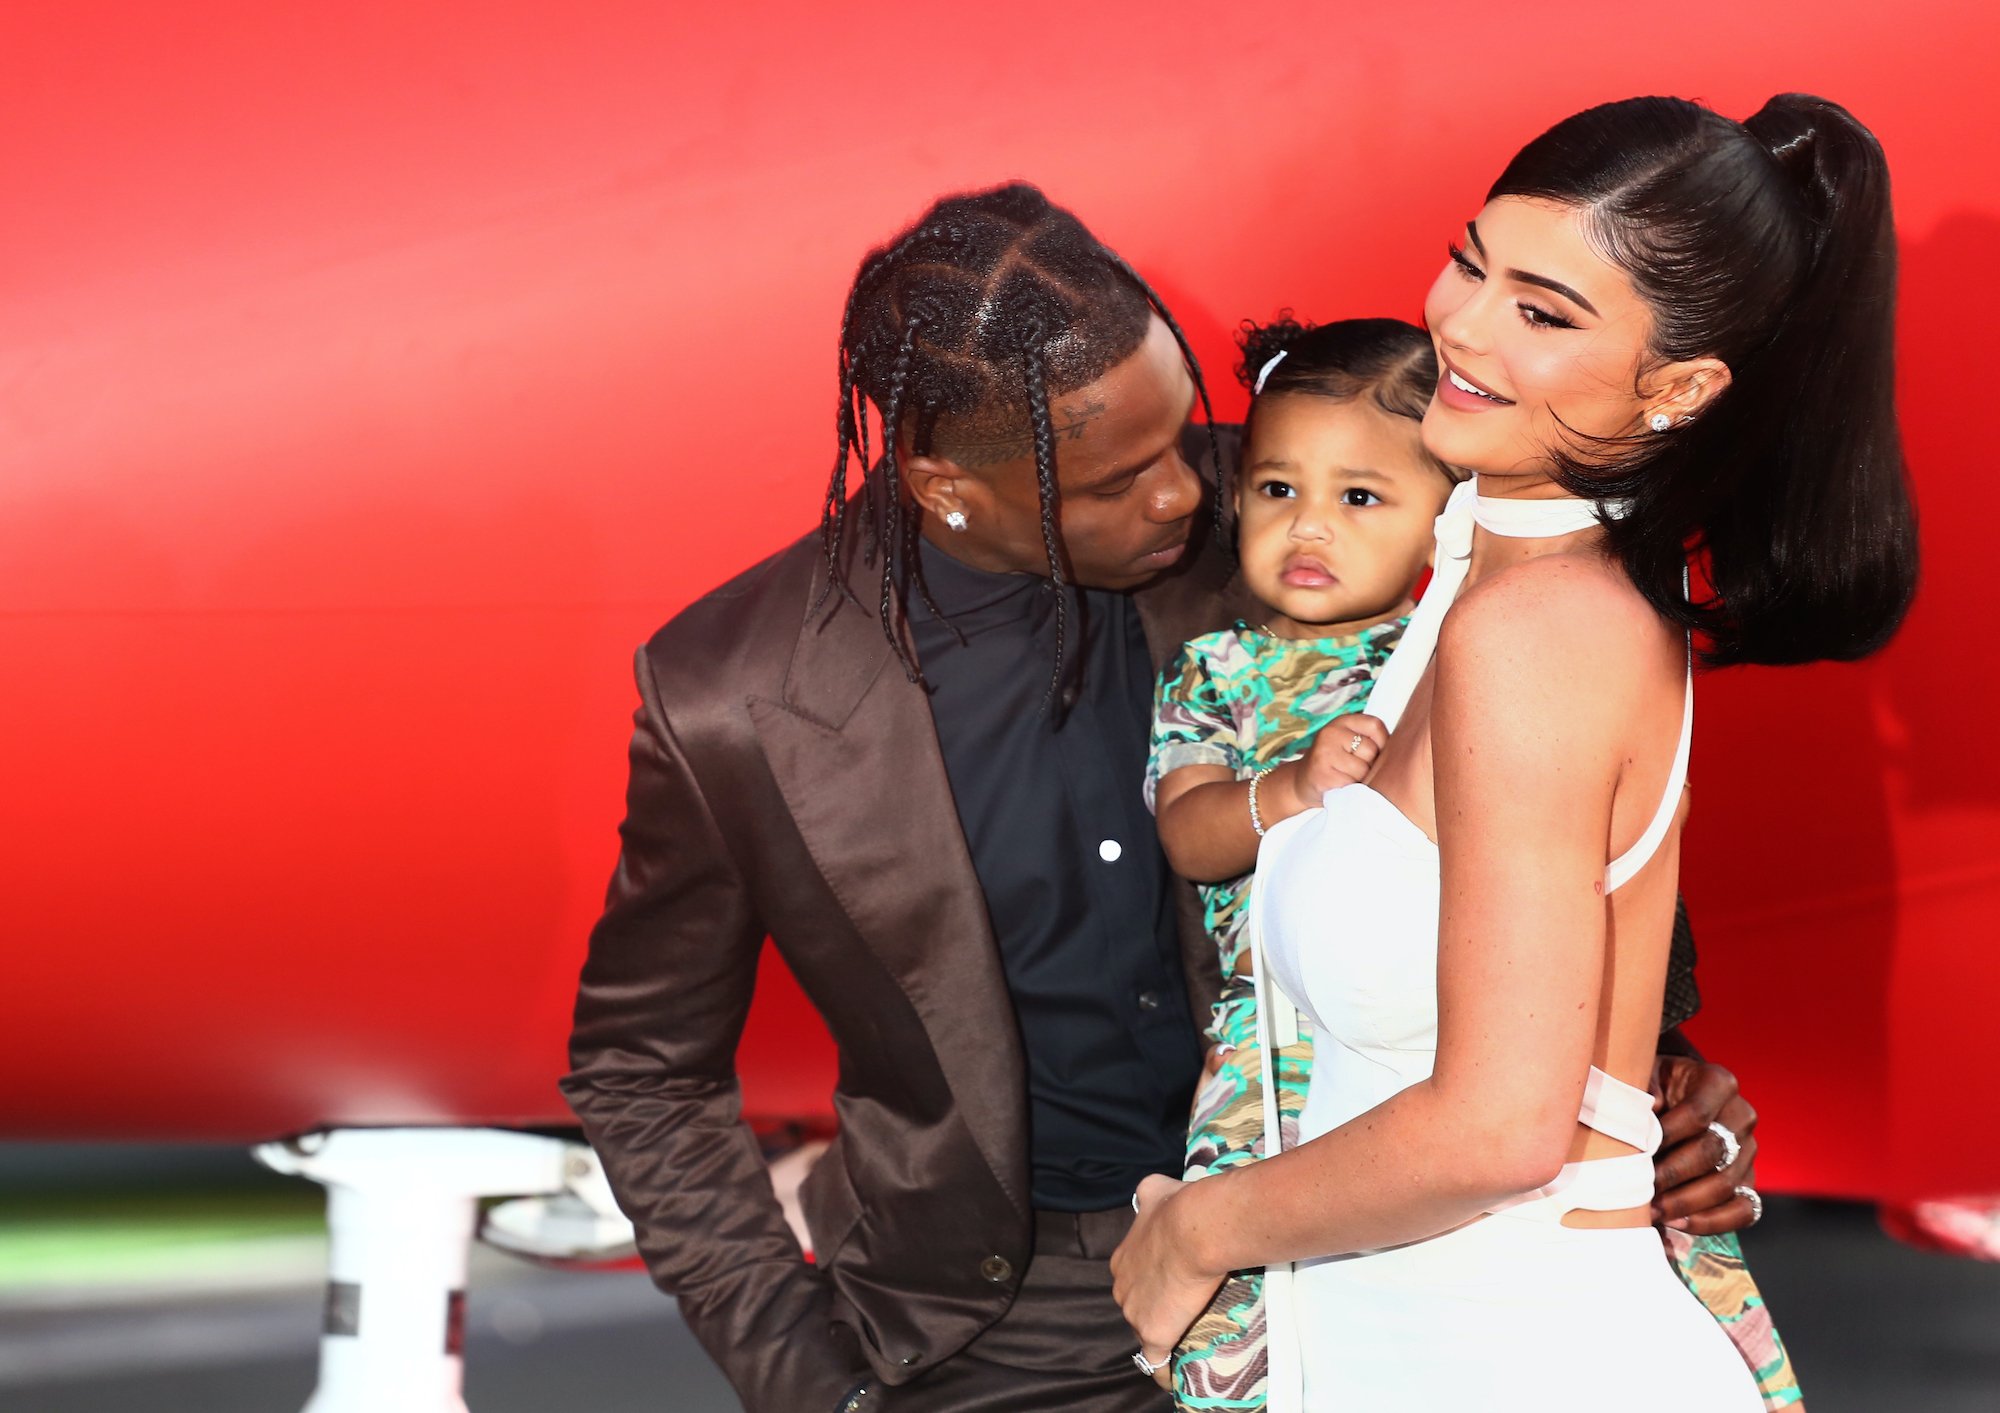 Travis Scott, Stormi Webster, and Kylie Jenner smiling in front of a red background